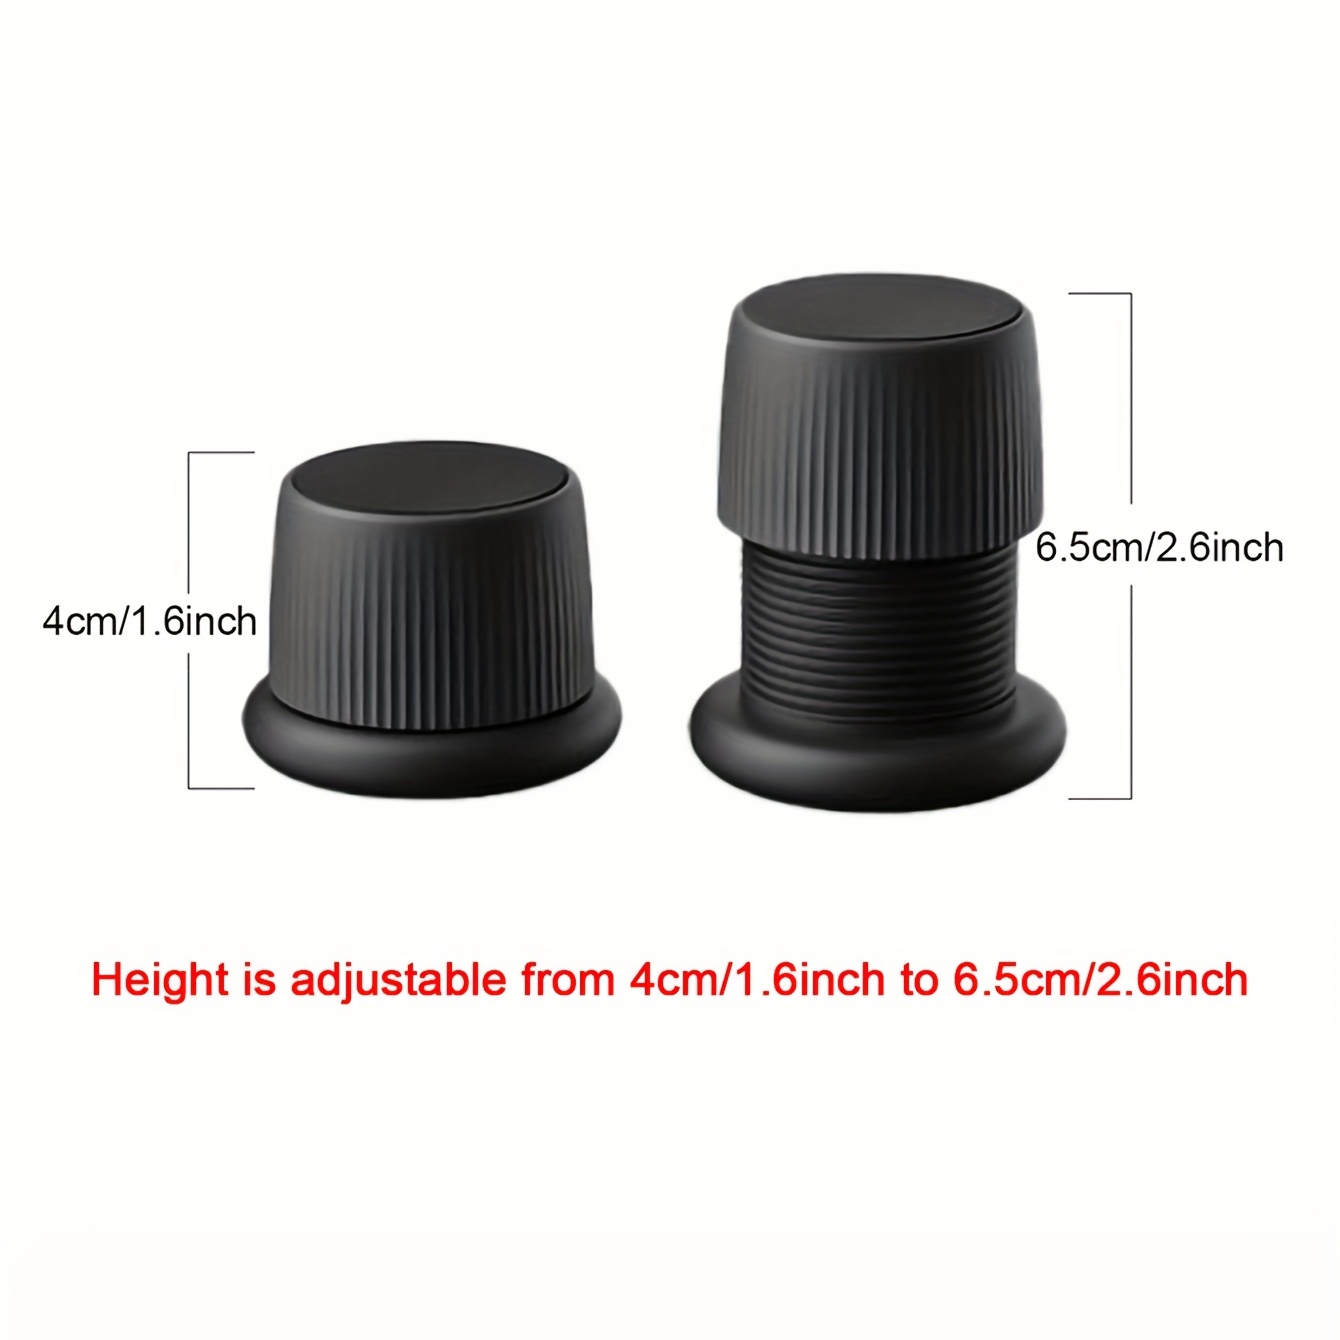 Single and Double Mug Riser for Breville Machines, Mug Risers for